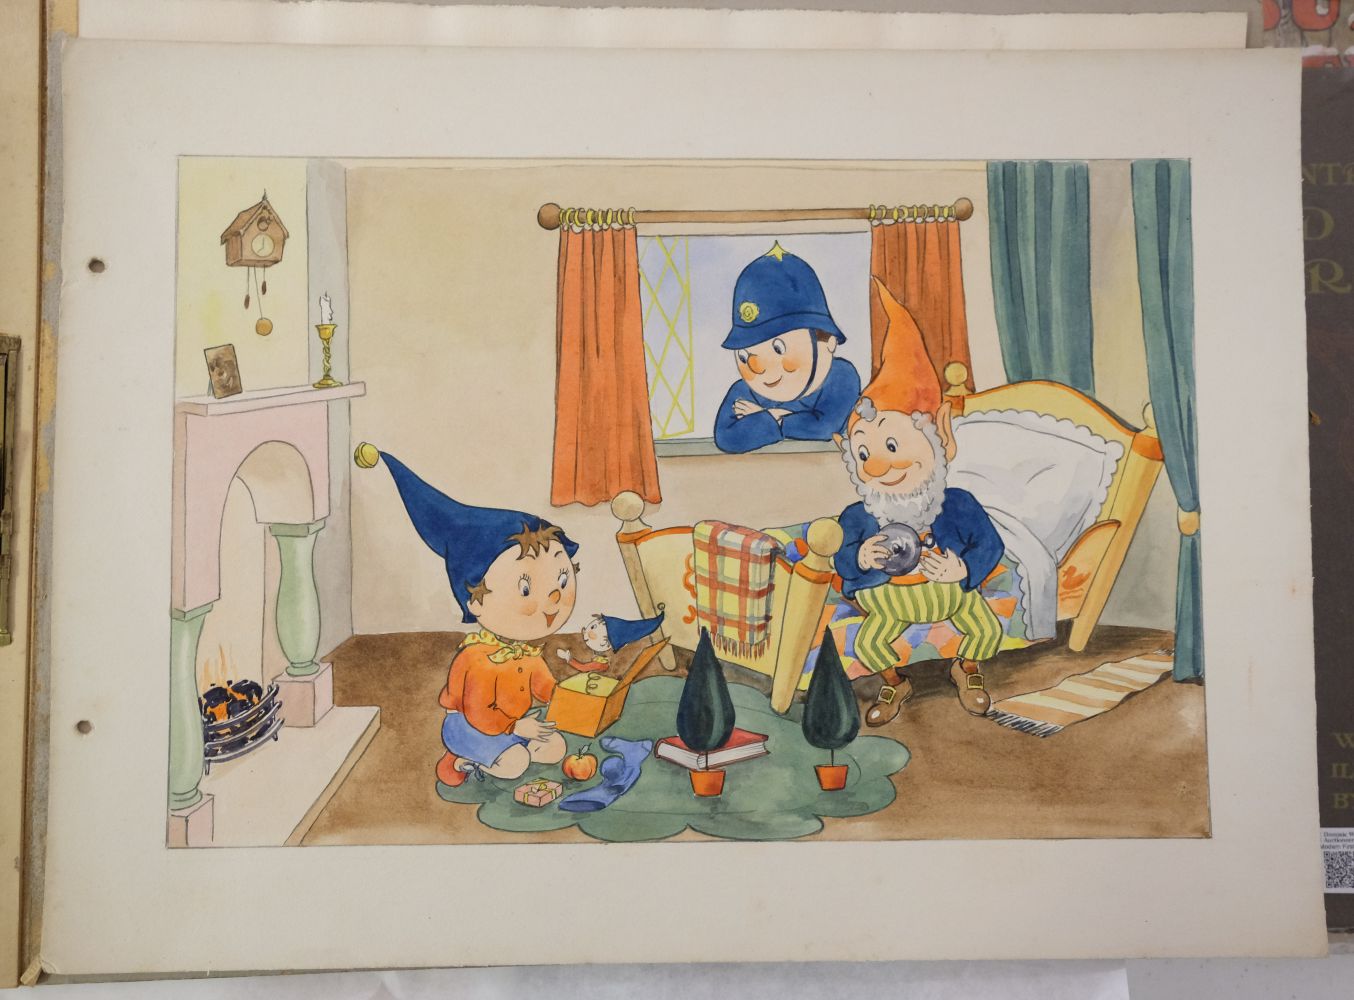 Blyton (Enid). Noddy's Christmas Dream, with original illustrations by Miss Coventry - Image 8 of 11